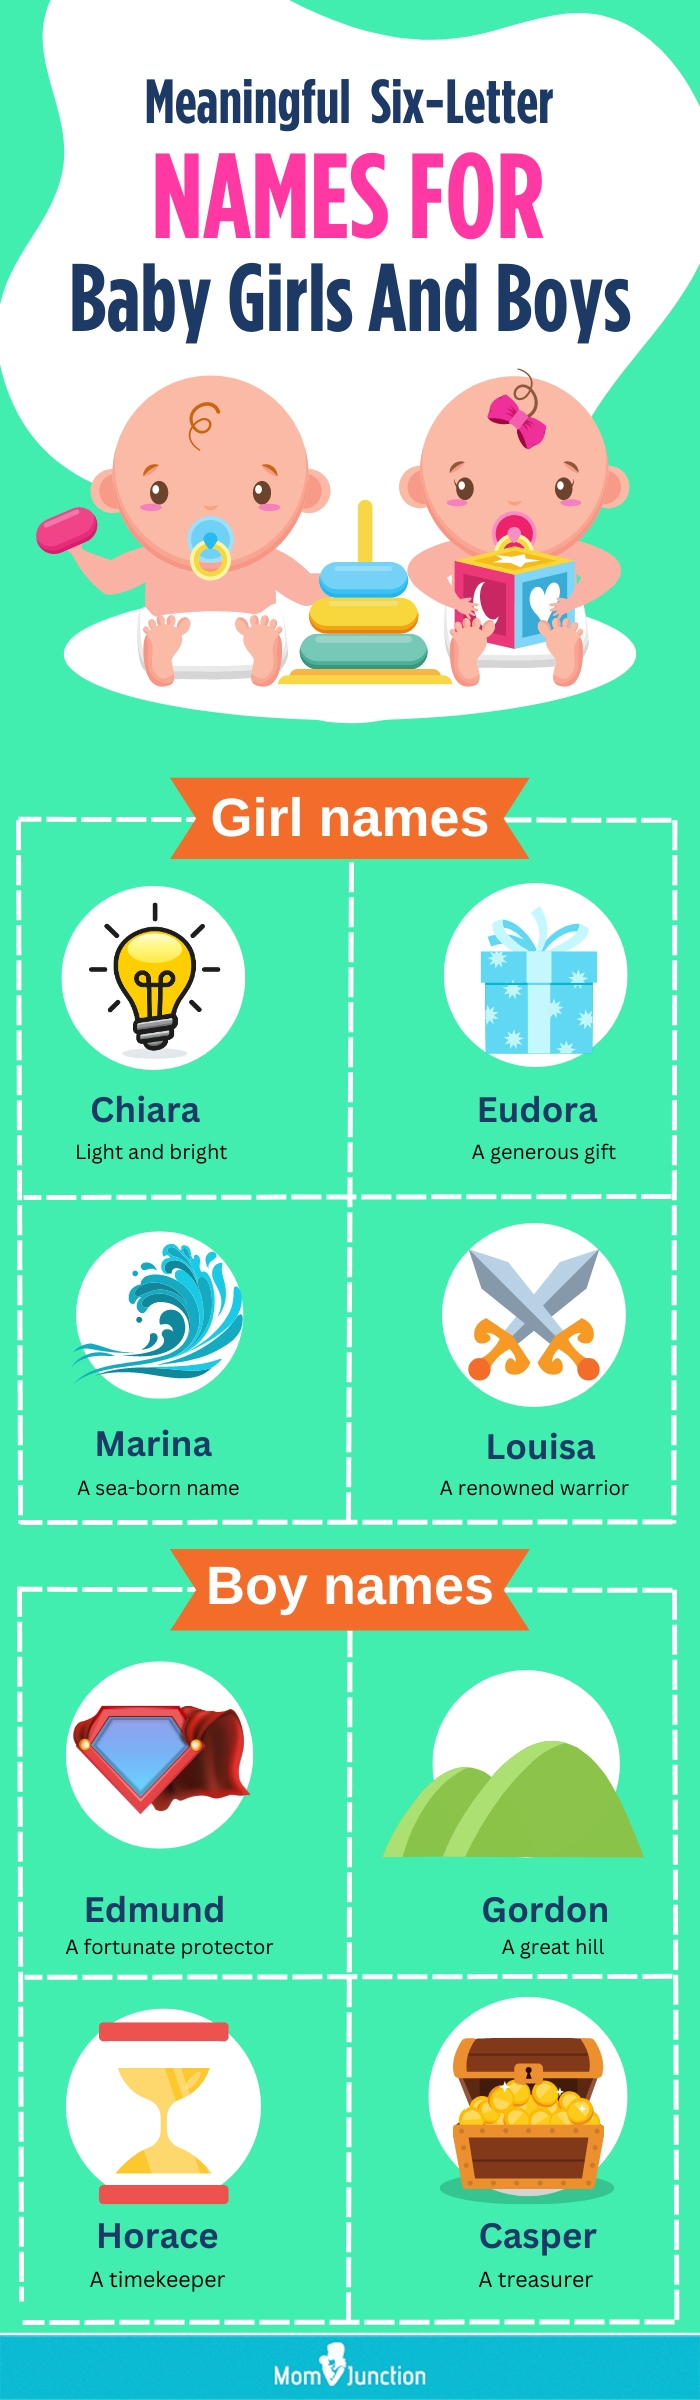 meaningful six letter names for baby girls and boys (infographic)